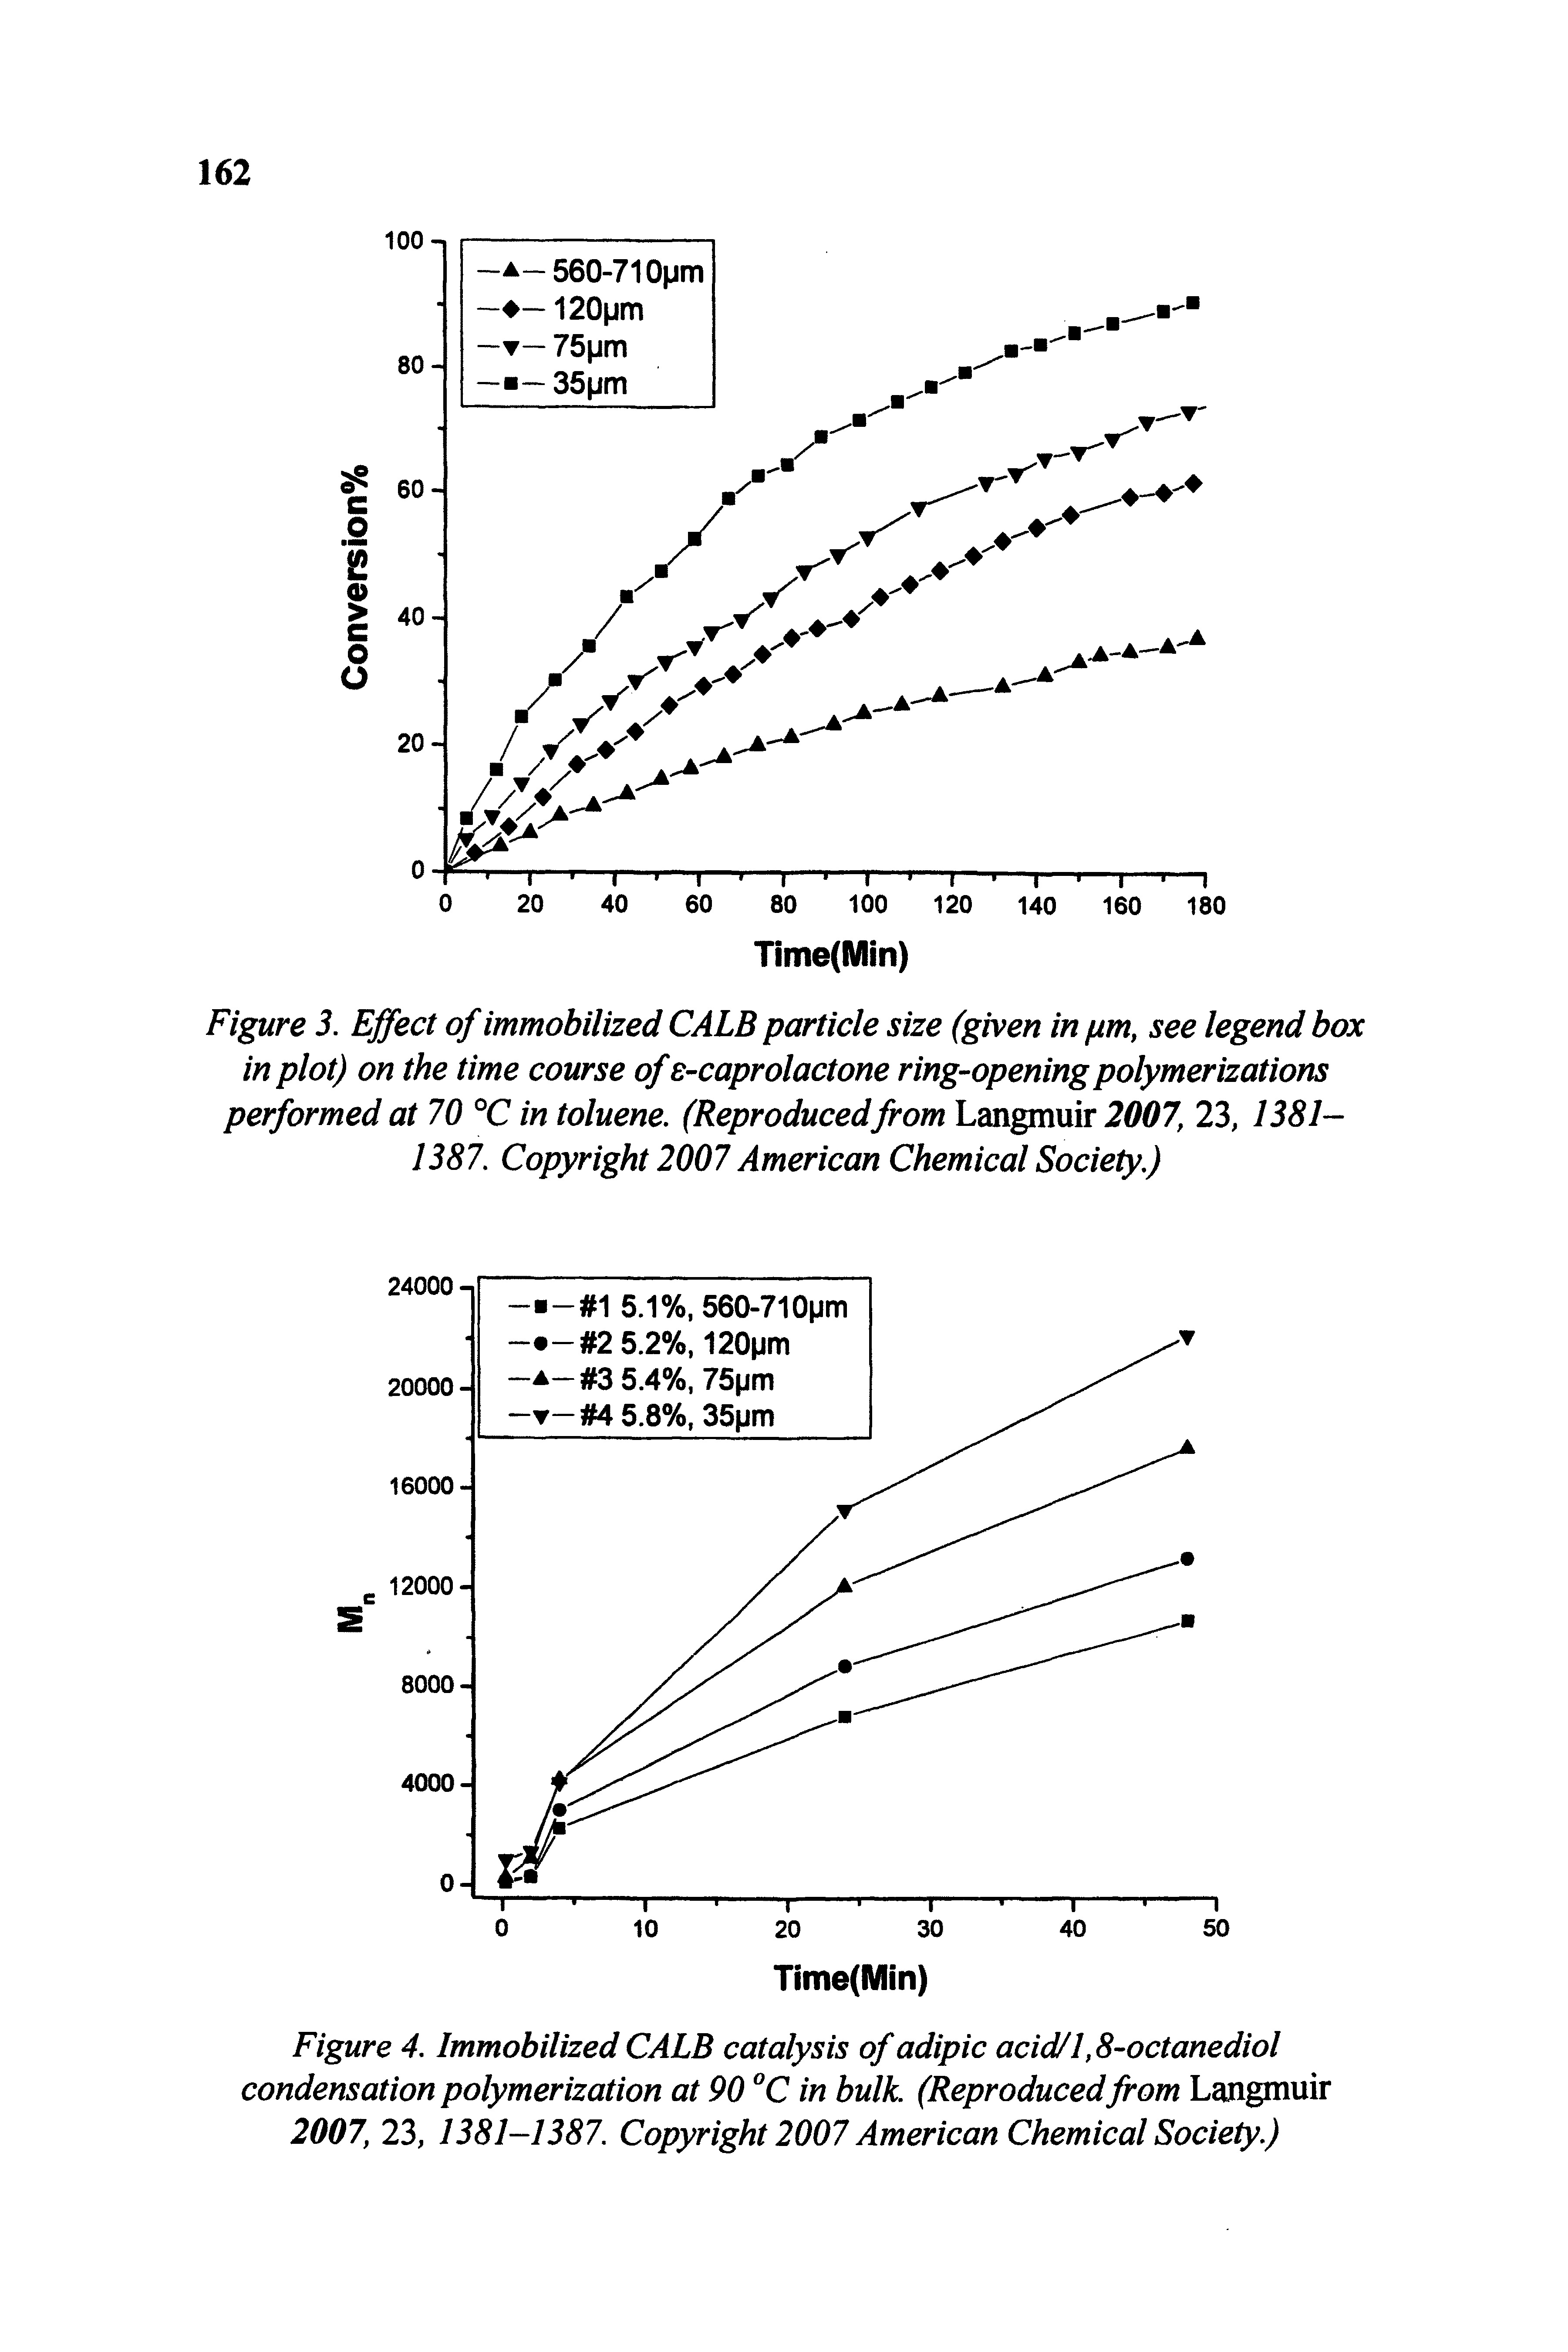 Figure 3. Effect of immobilized CALB particle size (given in pm, see legend box in plot) on the time course of e-caprolactone ring-opening polymerizations performed at 70 °C in toluene. (Reproduced from Langmuir 2007, 23, 1381-1387. Copyright 2007 American Chemical Society.)...